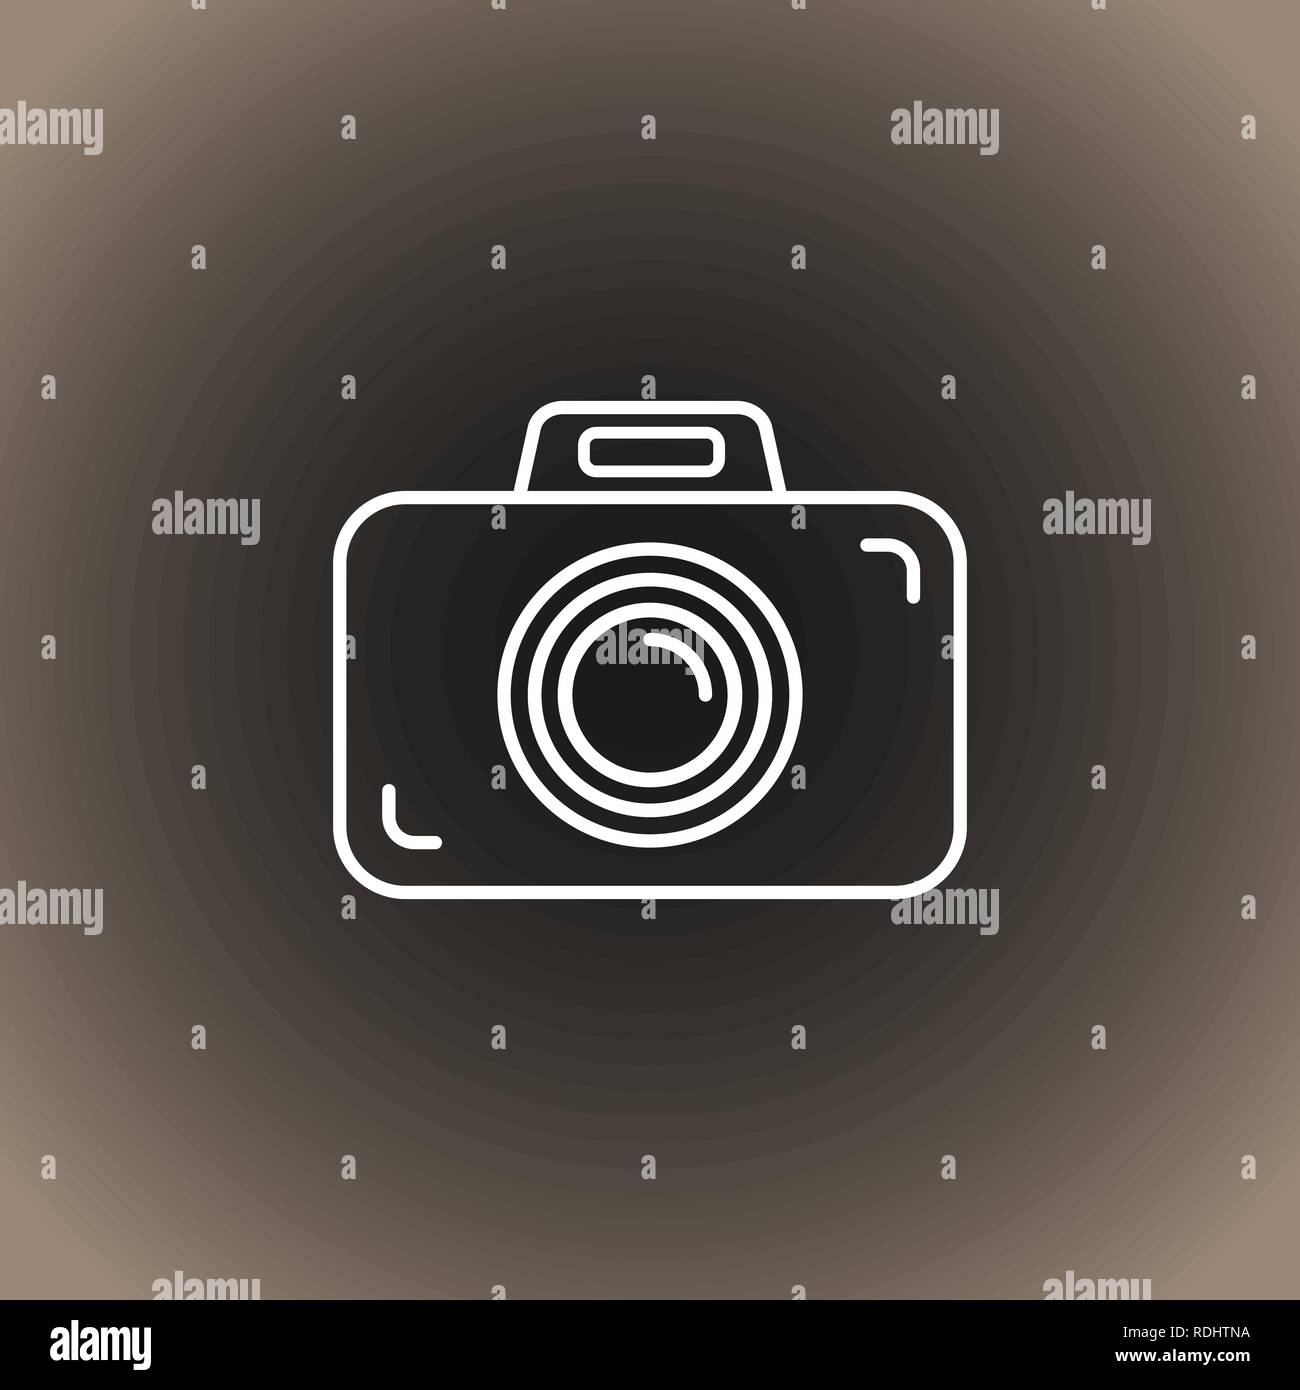 Outline photo camera icon on black/dark gray and beige gradient background. Vector illustration, EPS10. Stock Vector